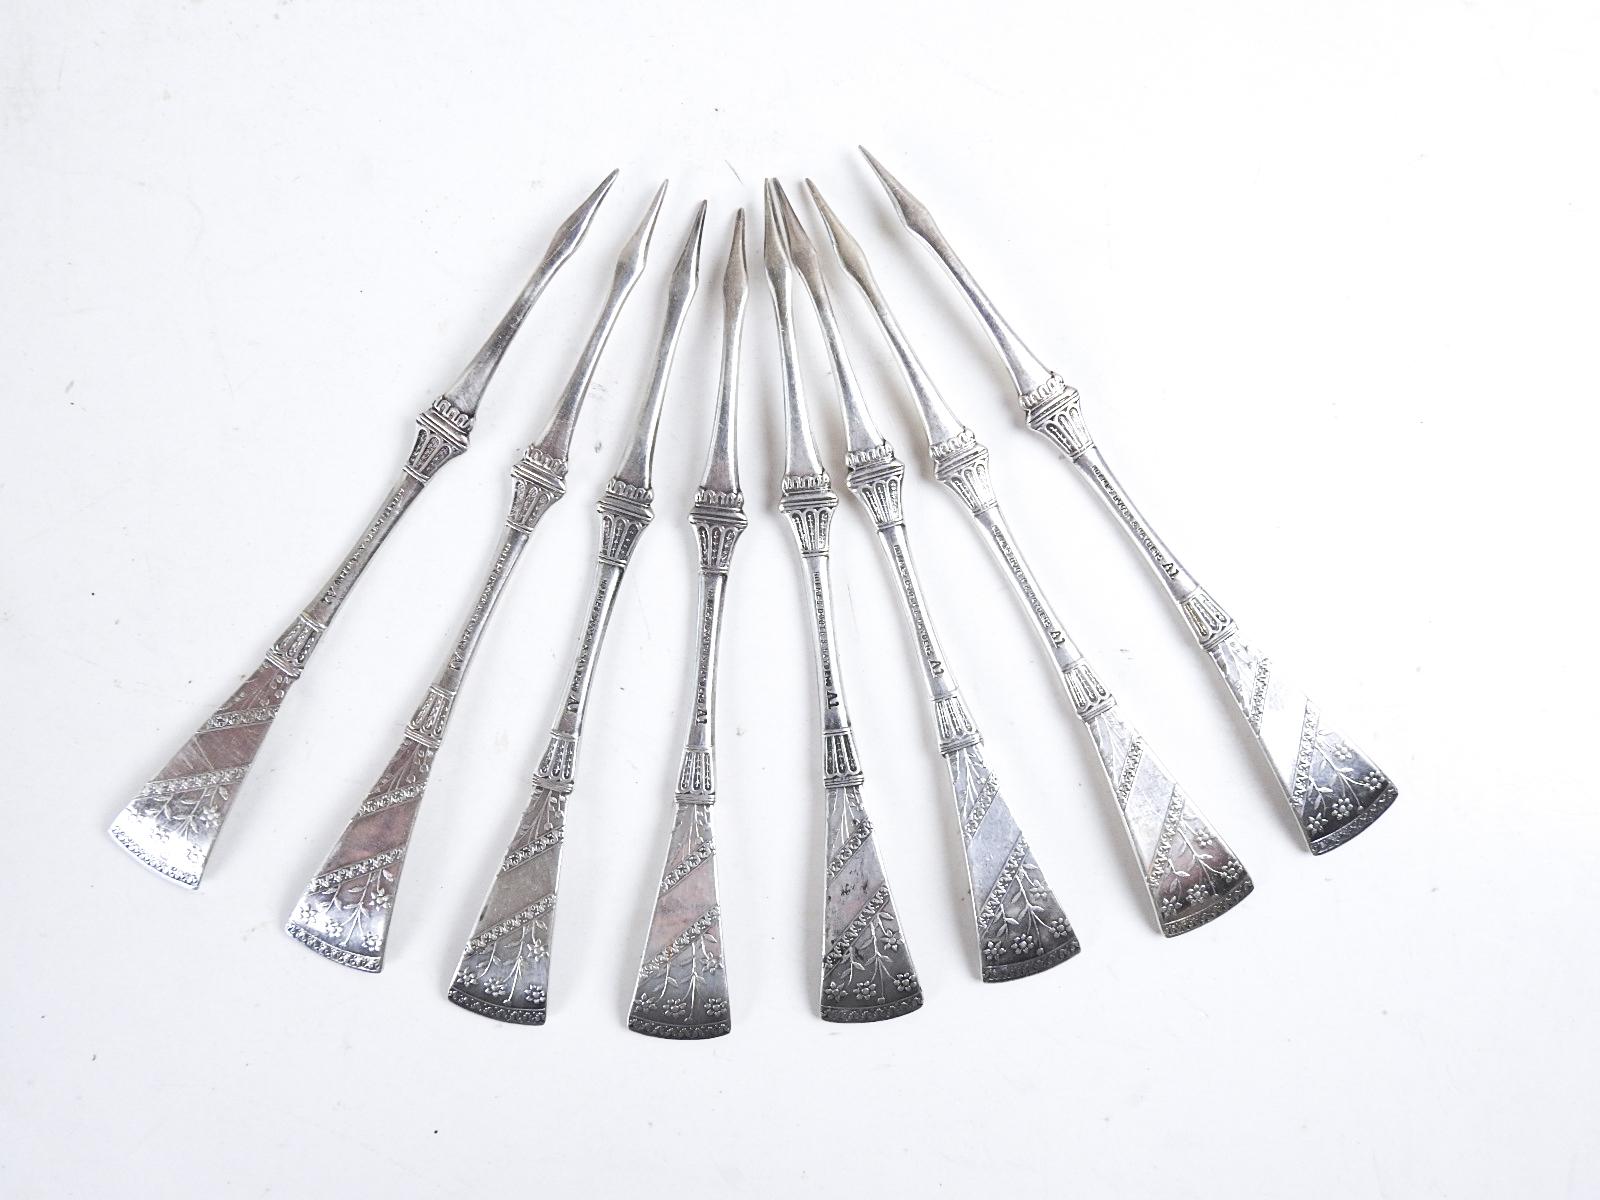 Antique 1860s Silverplate Aesthetic Movement Nut Cheese Picks - Set of 8 For Sale 1